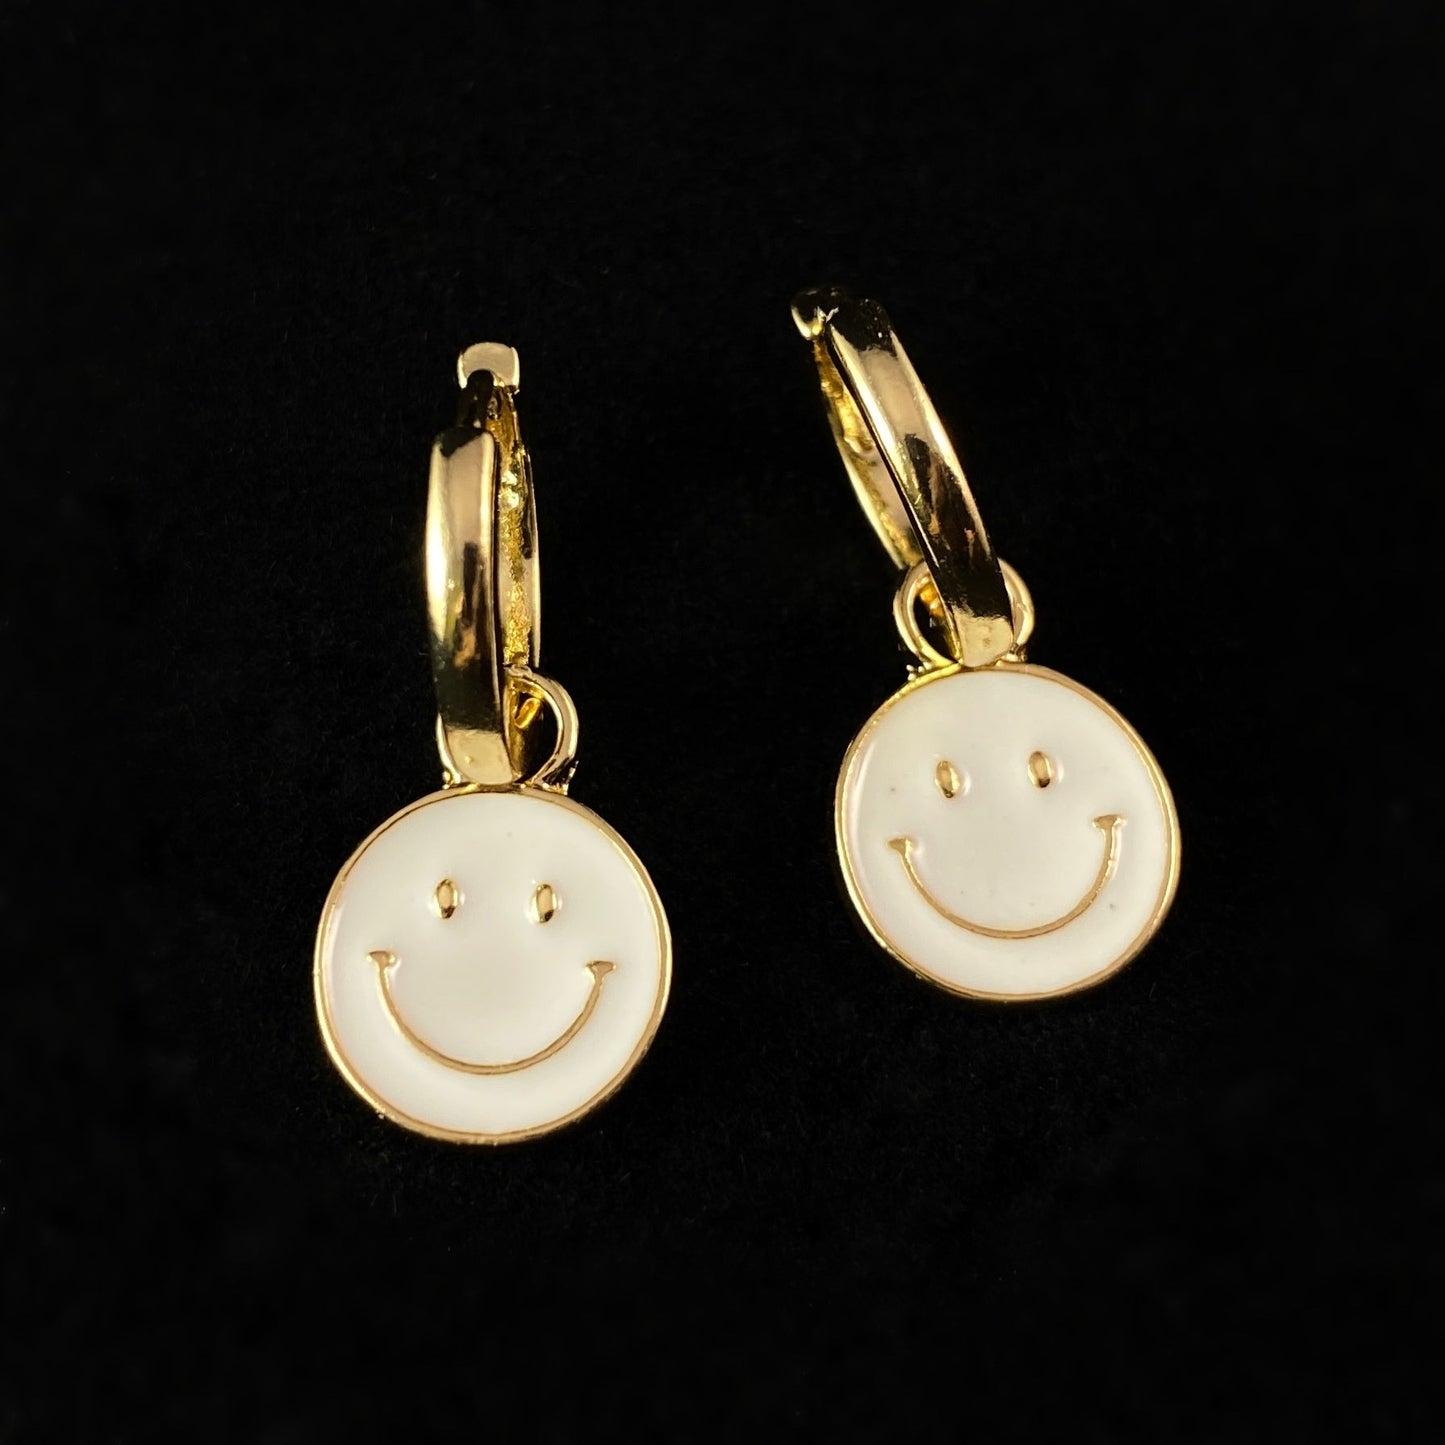 2-in-1 Smiley Face 90s Fashion Inspired Hoop Earrings -